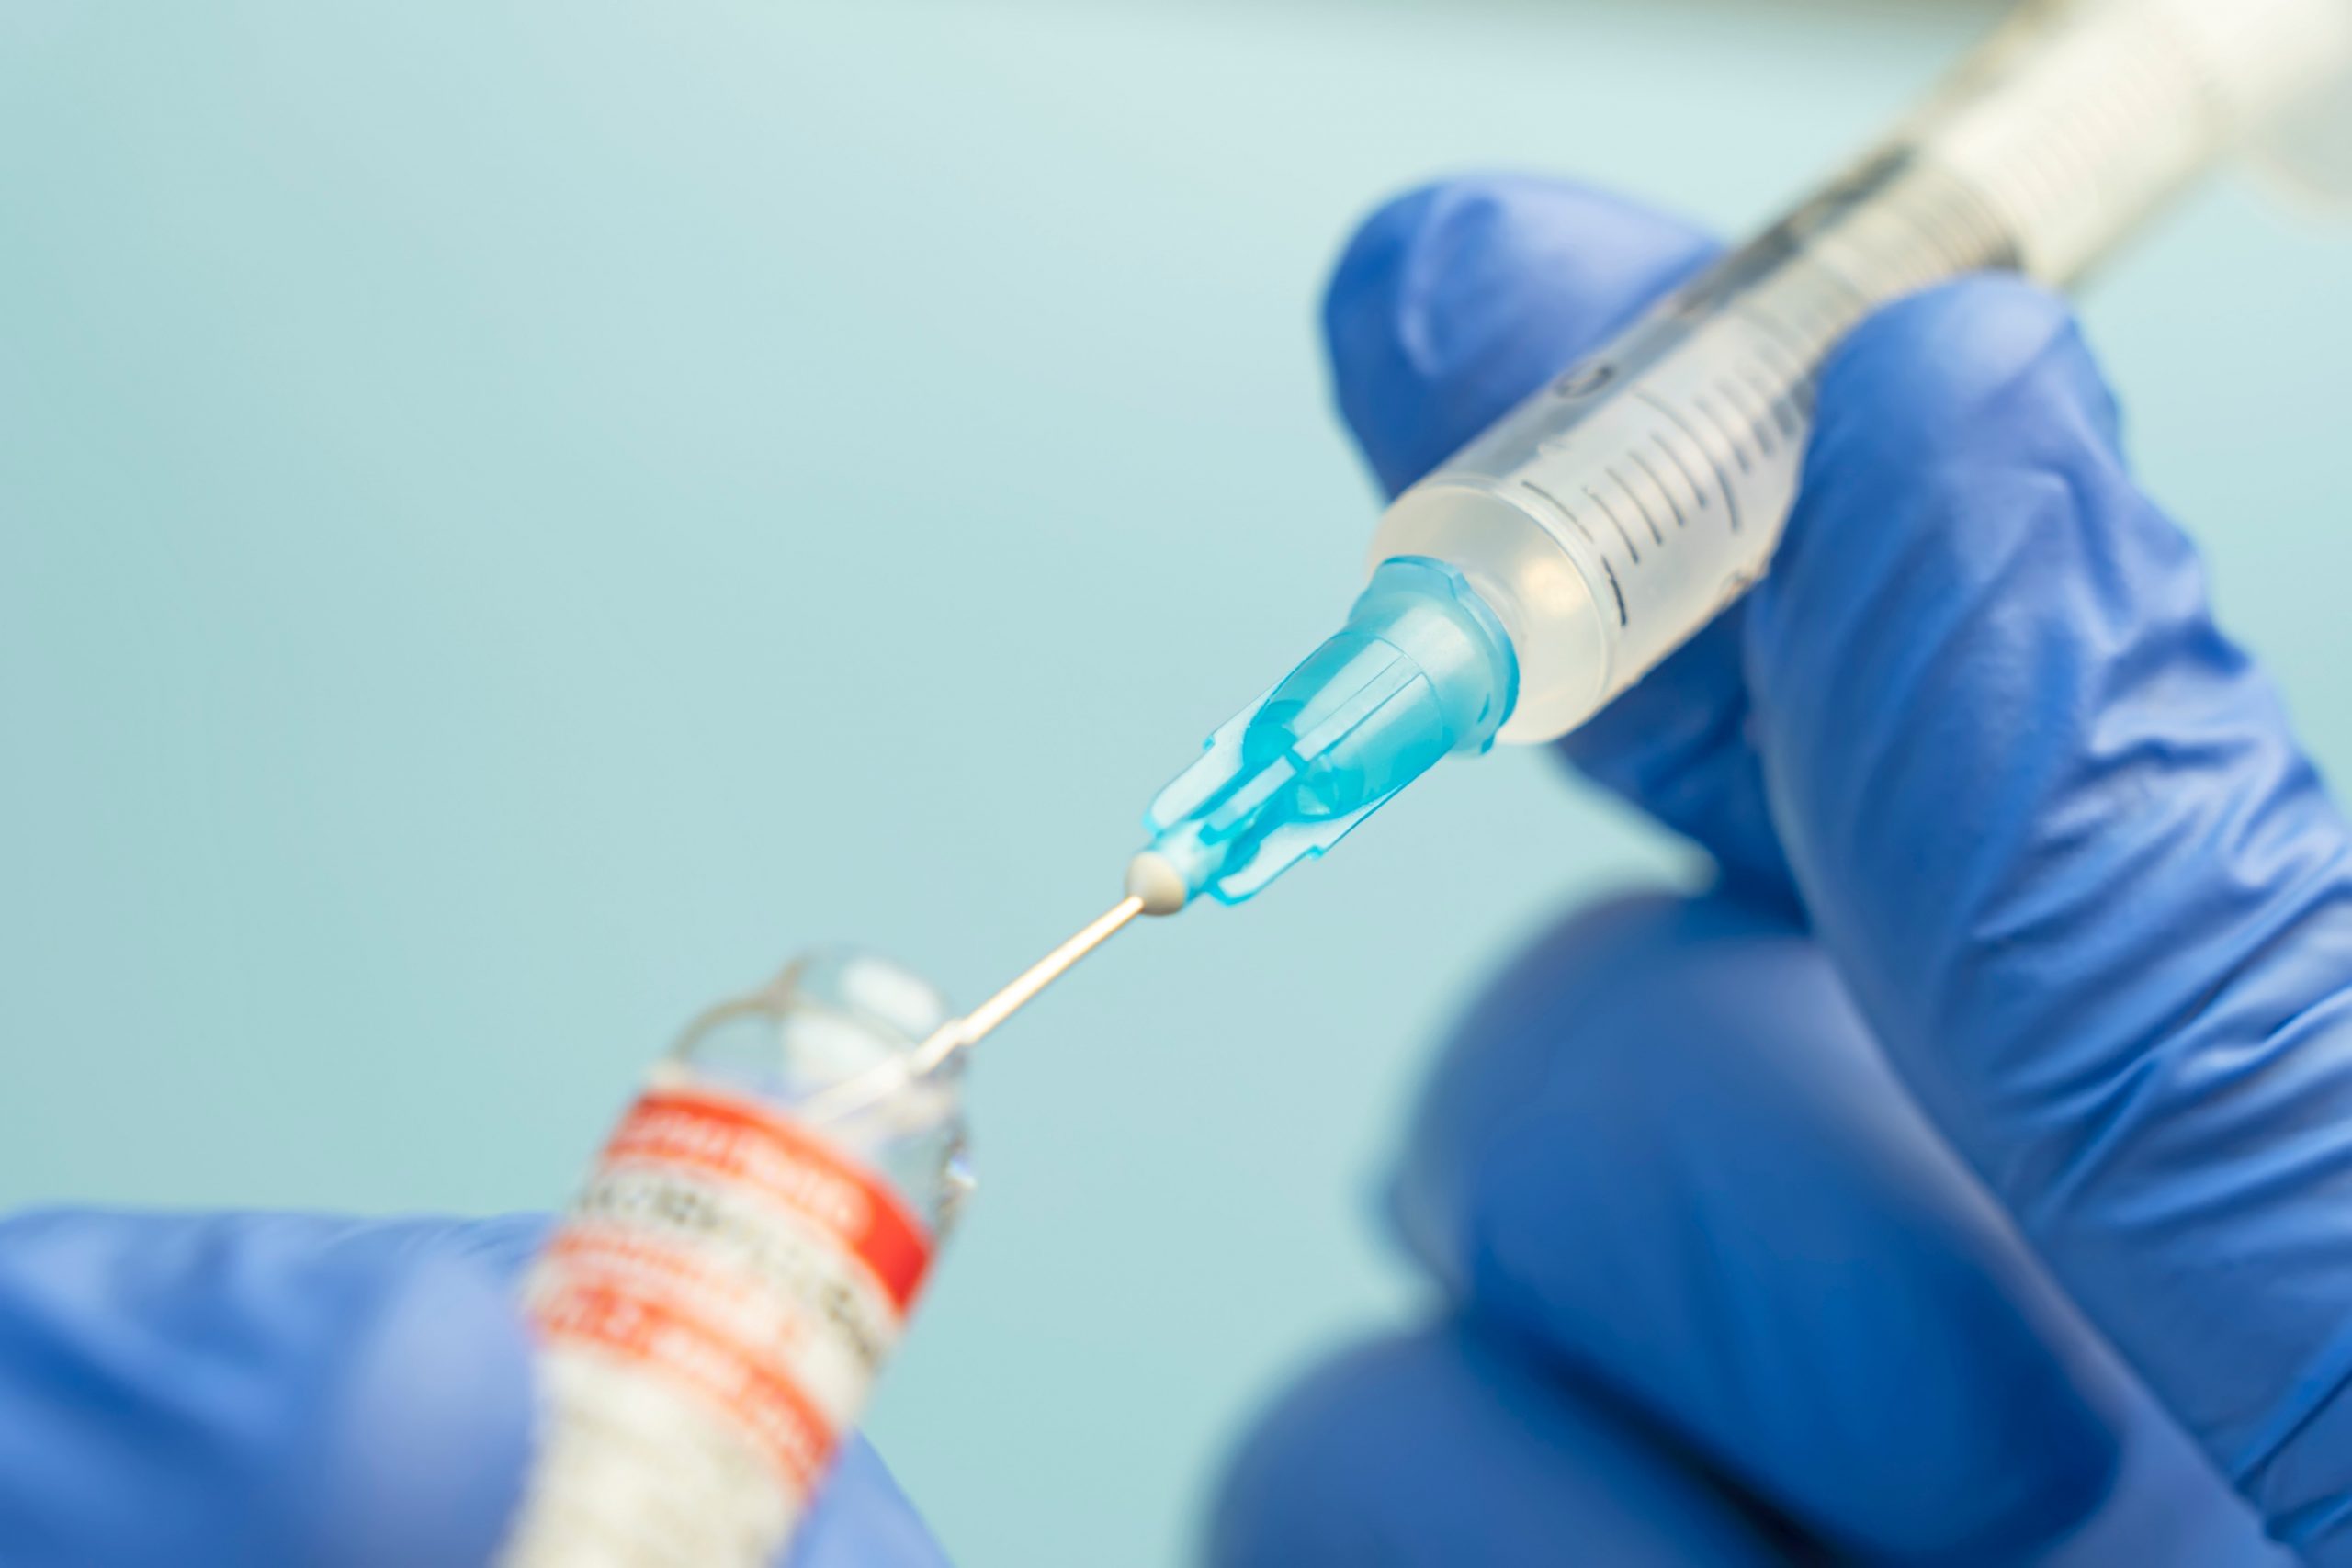 The Most Vaccine-Hesitant Europeans – Where are the Greeks?